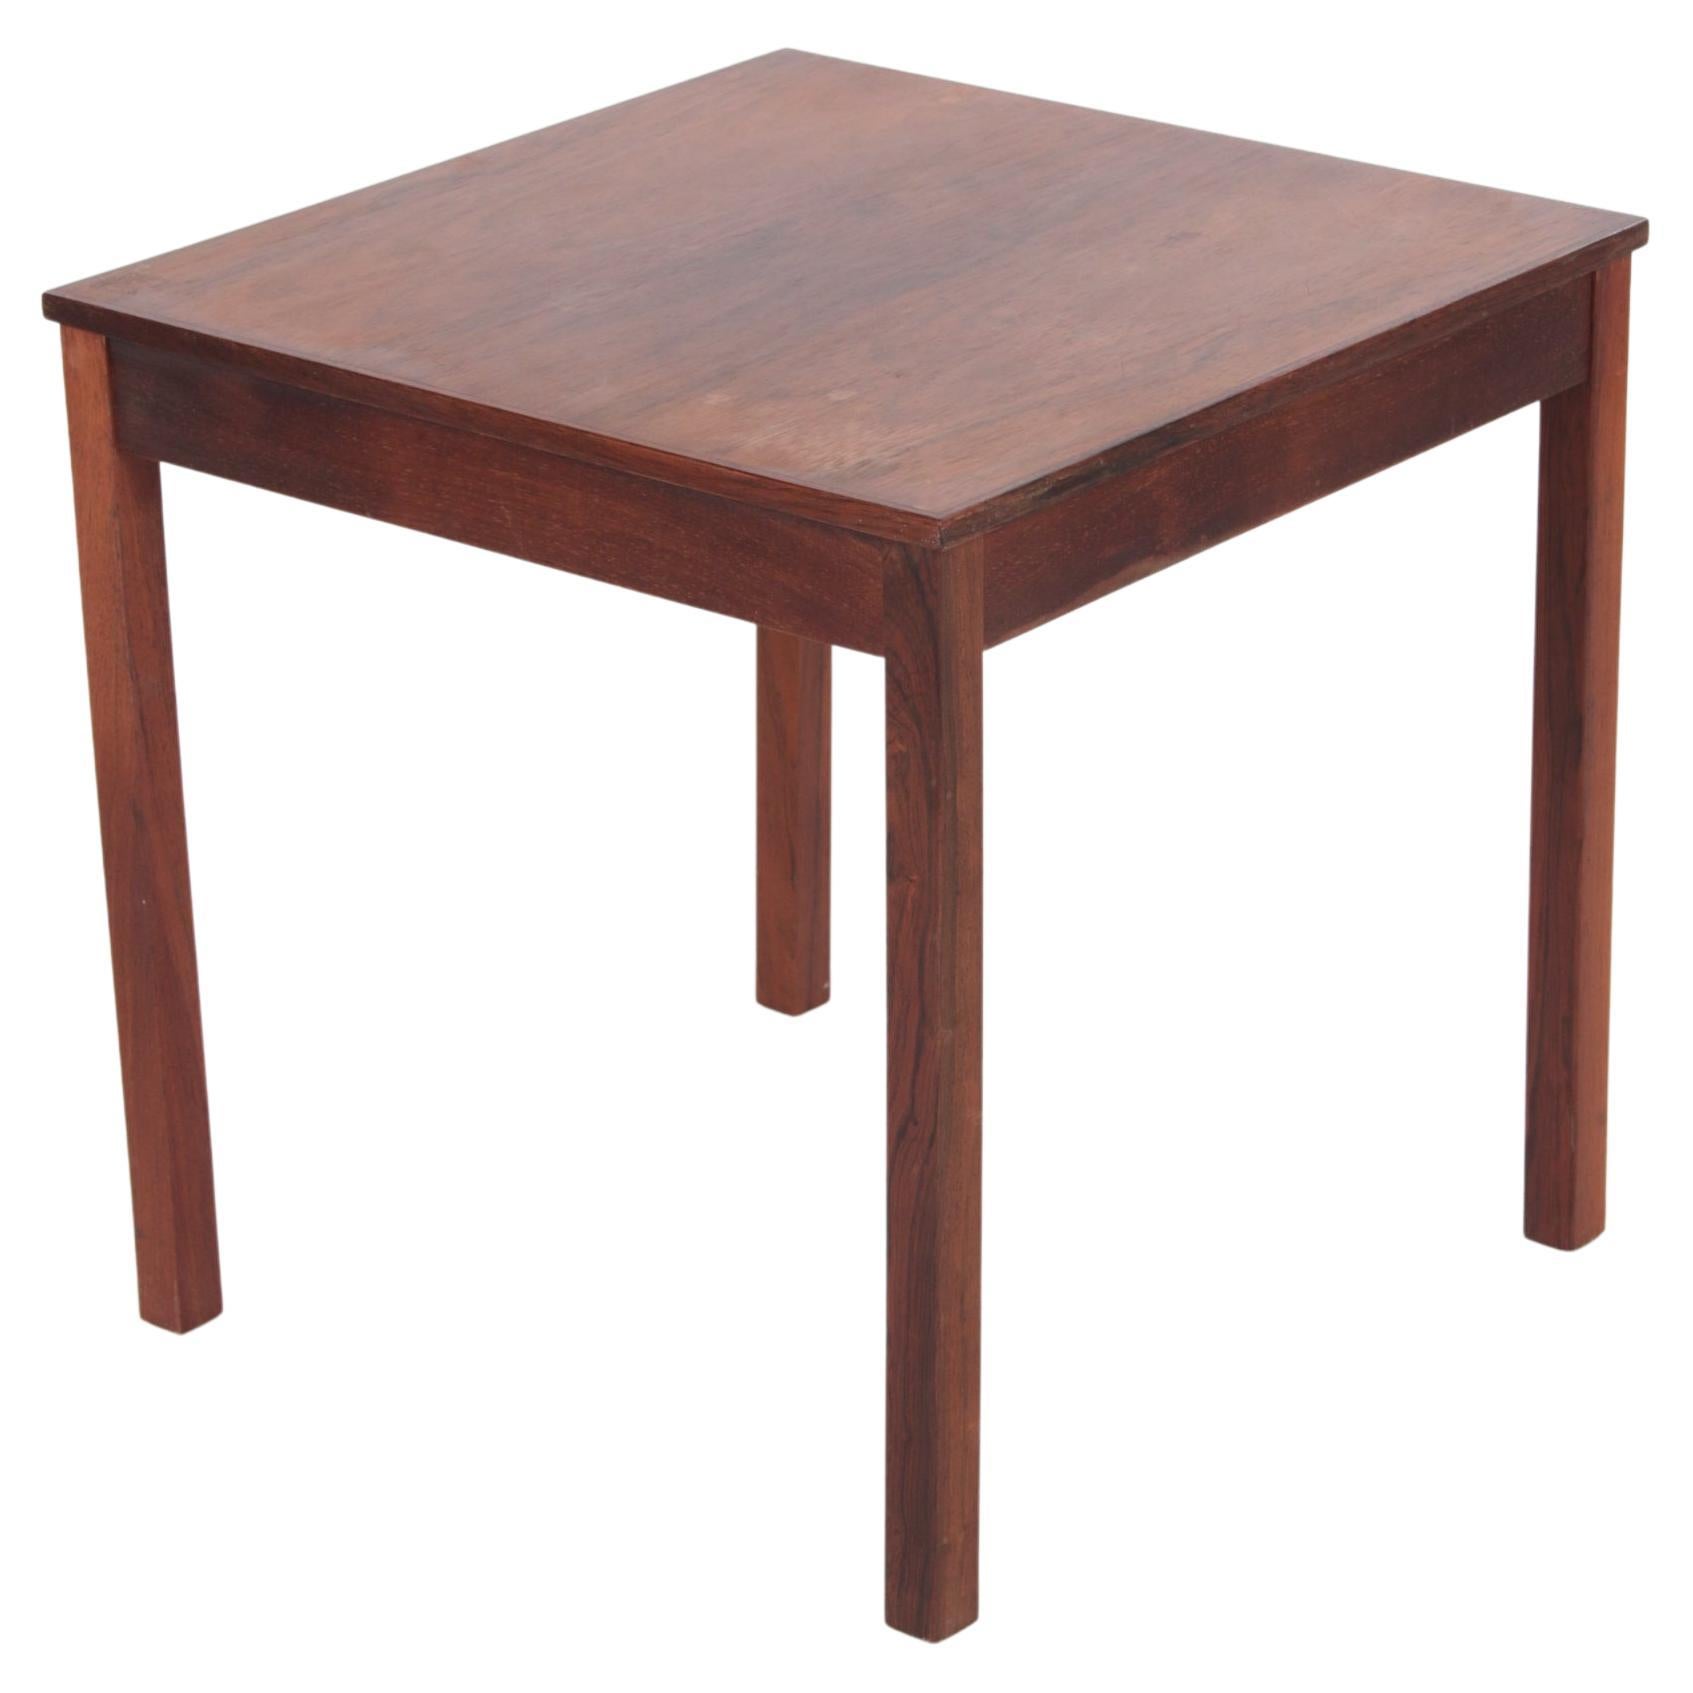 Wooden coffee table or side table from Denmark